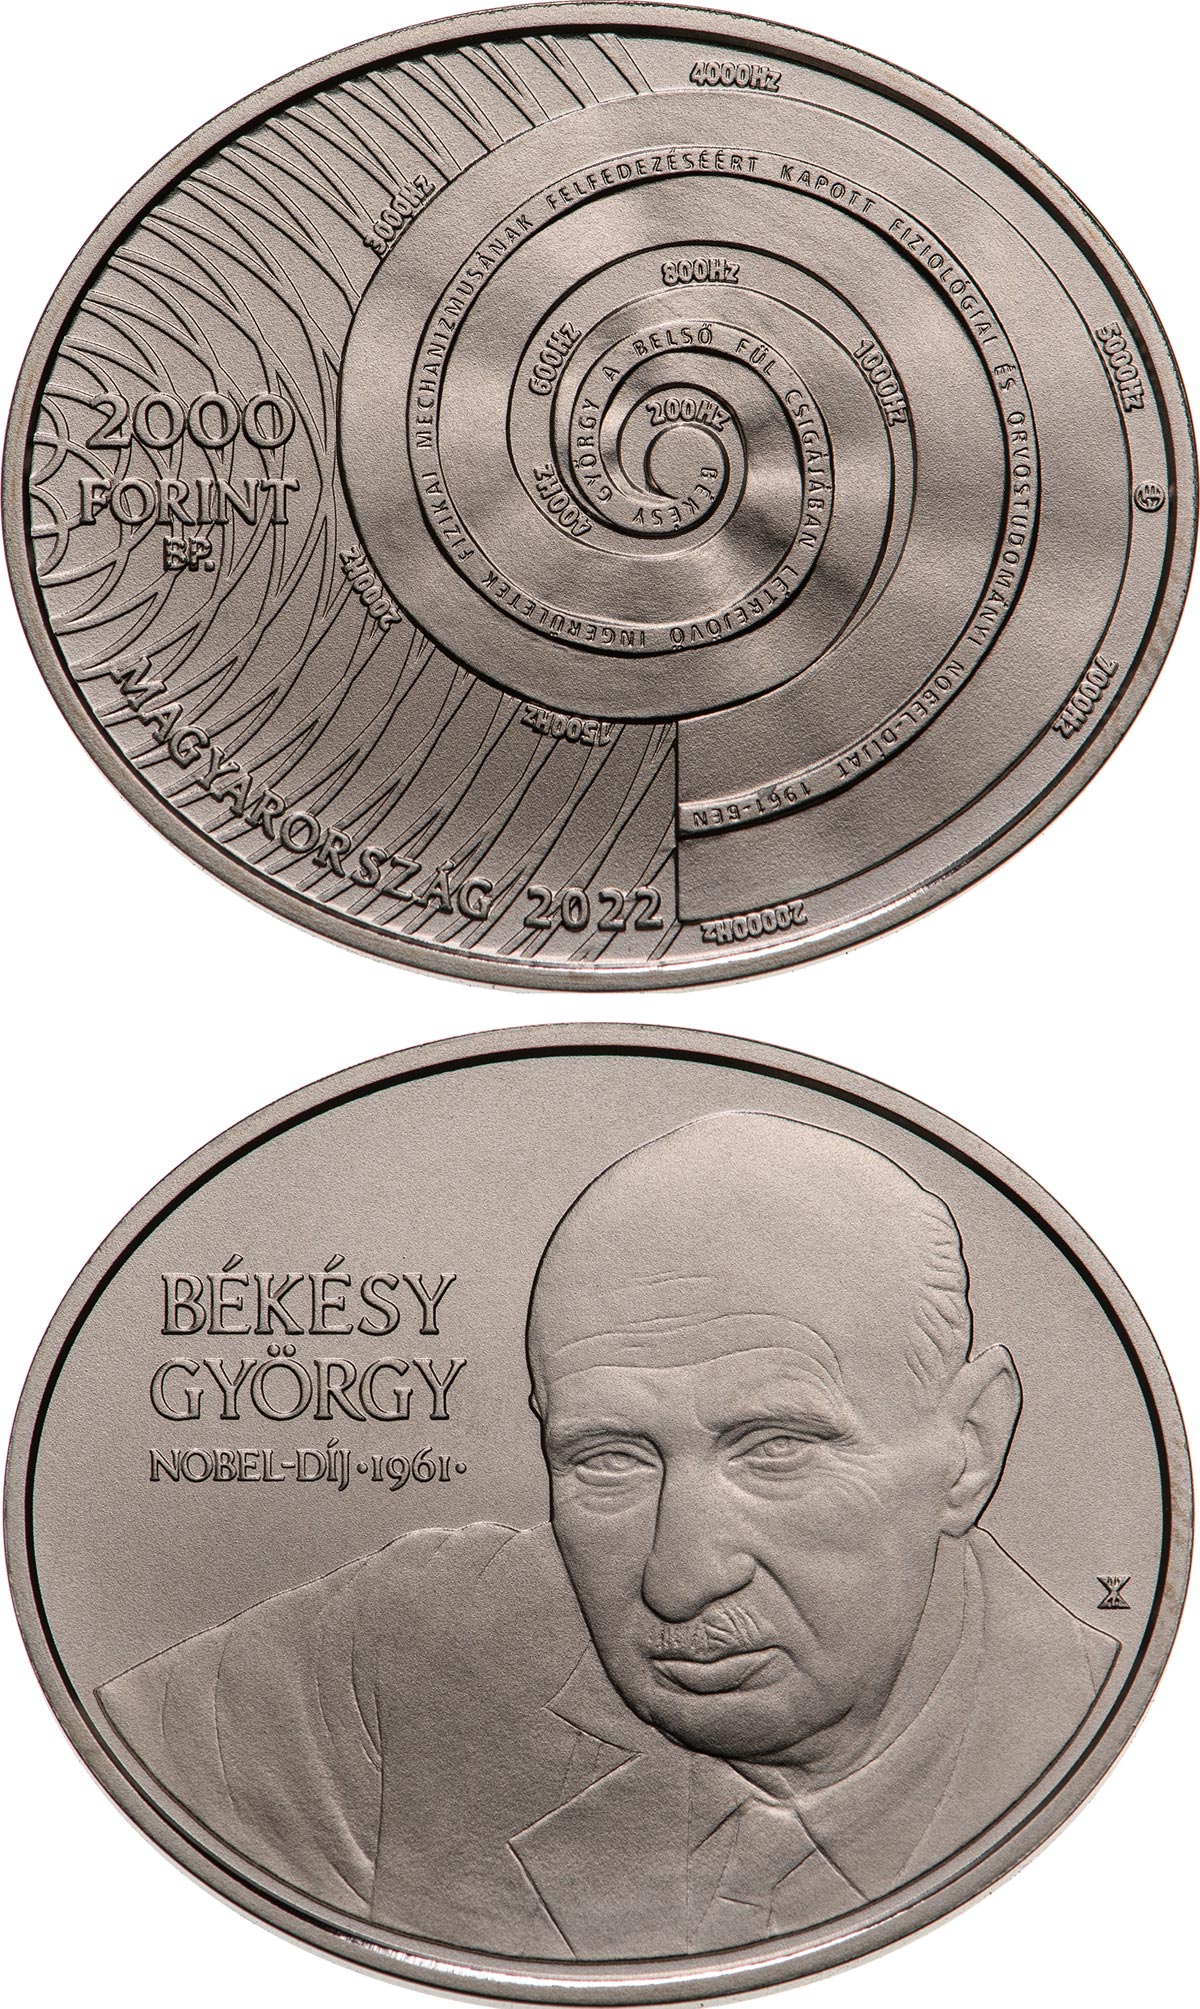 Image of 2000 forint coin - György Békésy | Hungary 2022.  The Copper–Nickel (CuNi) coin is of BU quality.